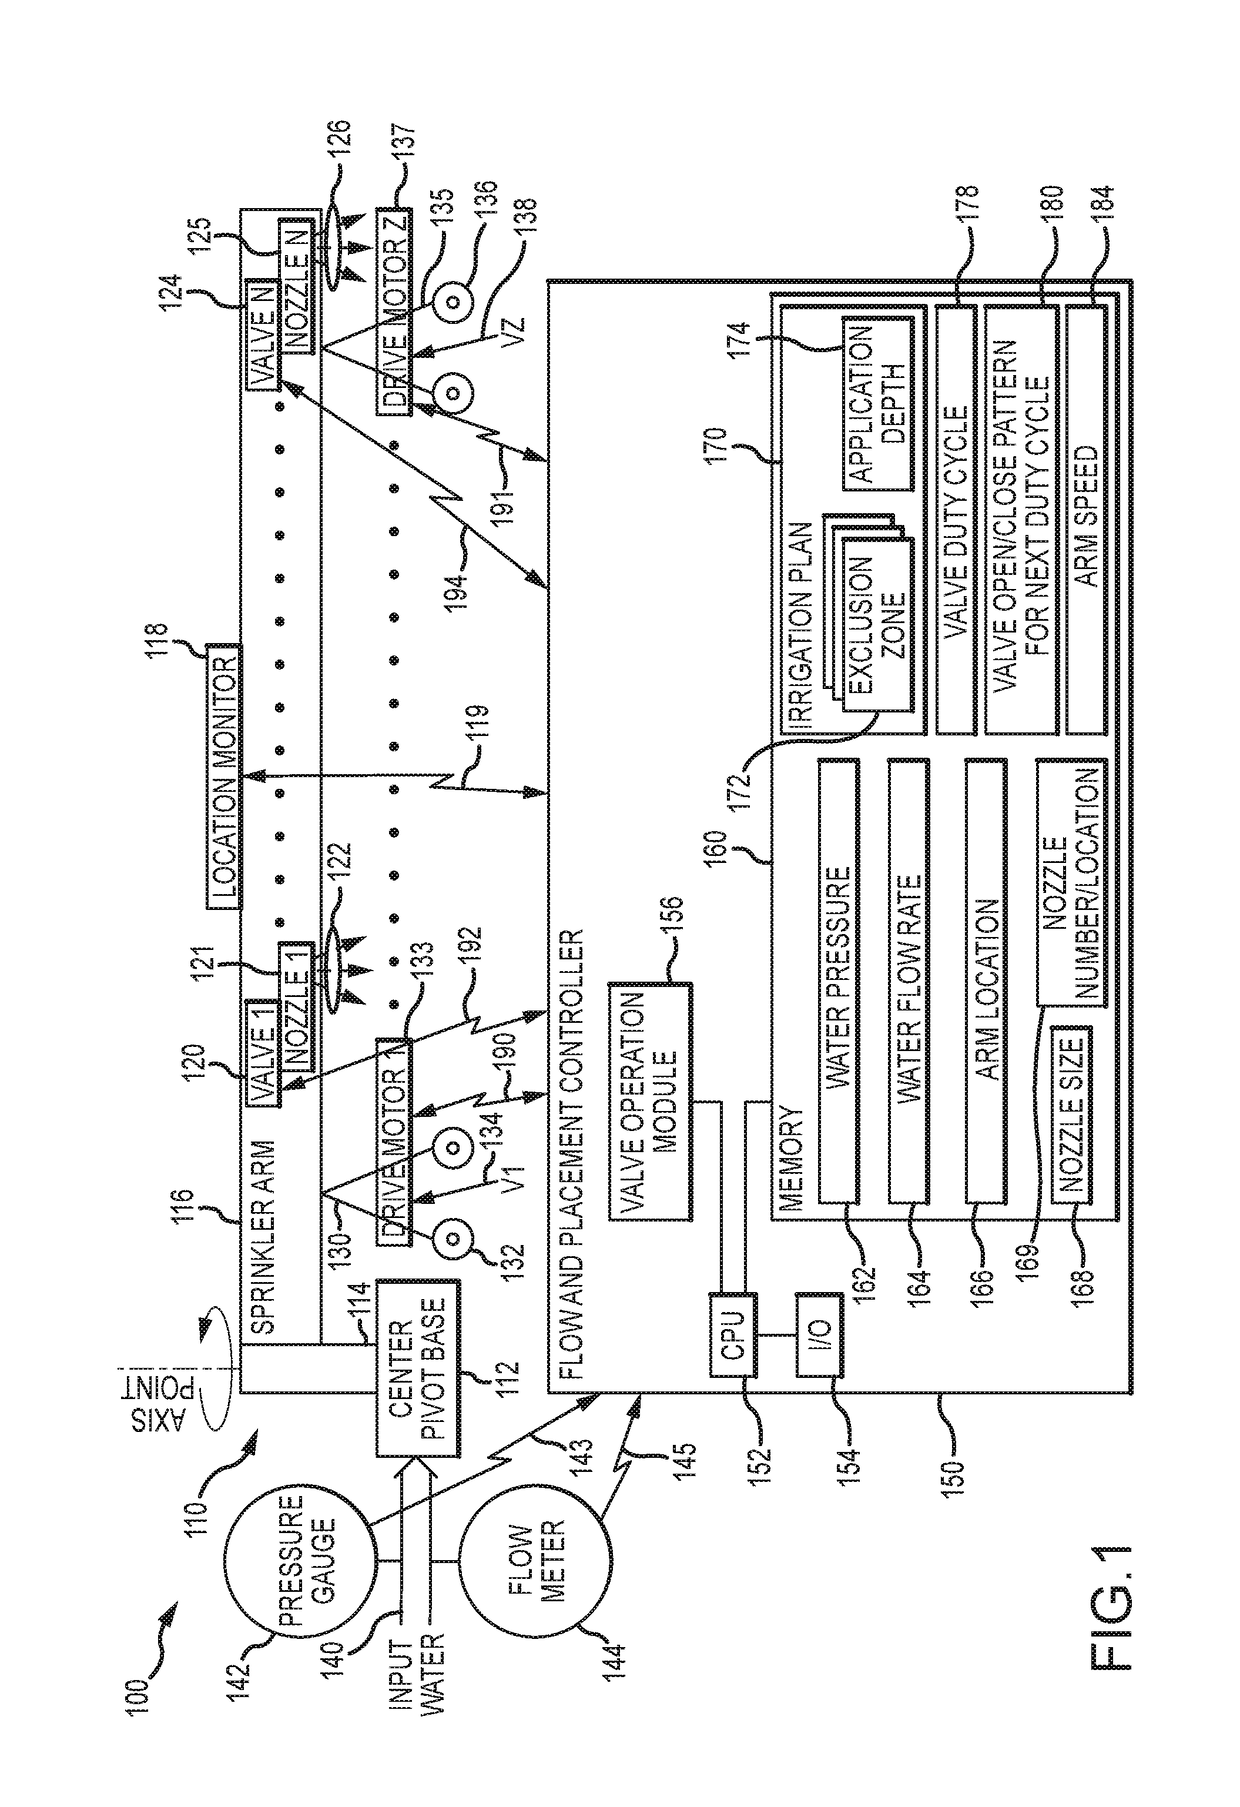 Center pivot irrigation system with placement control providing zones with variable depths of application